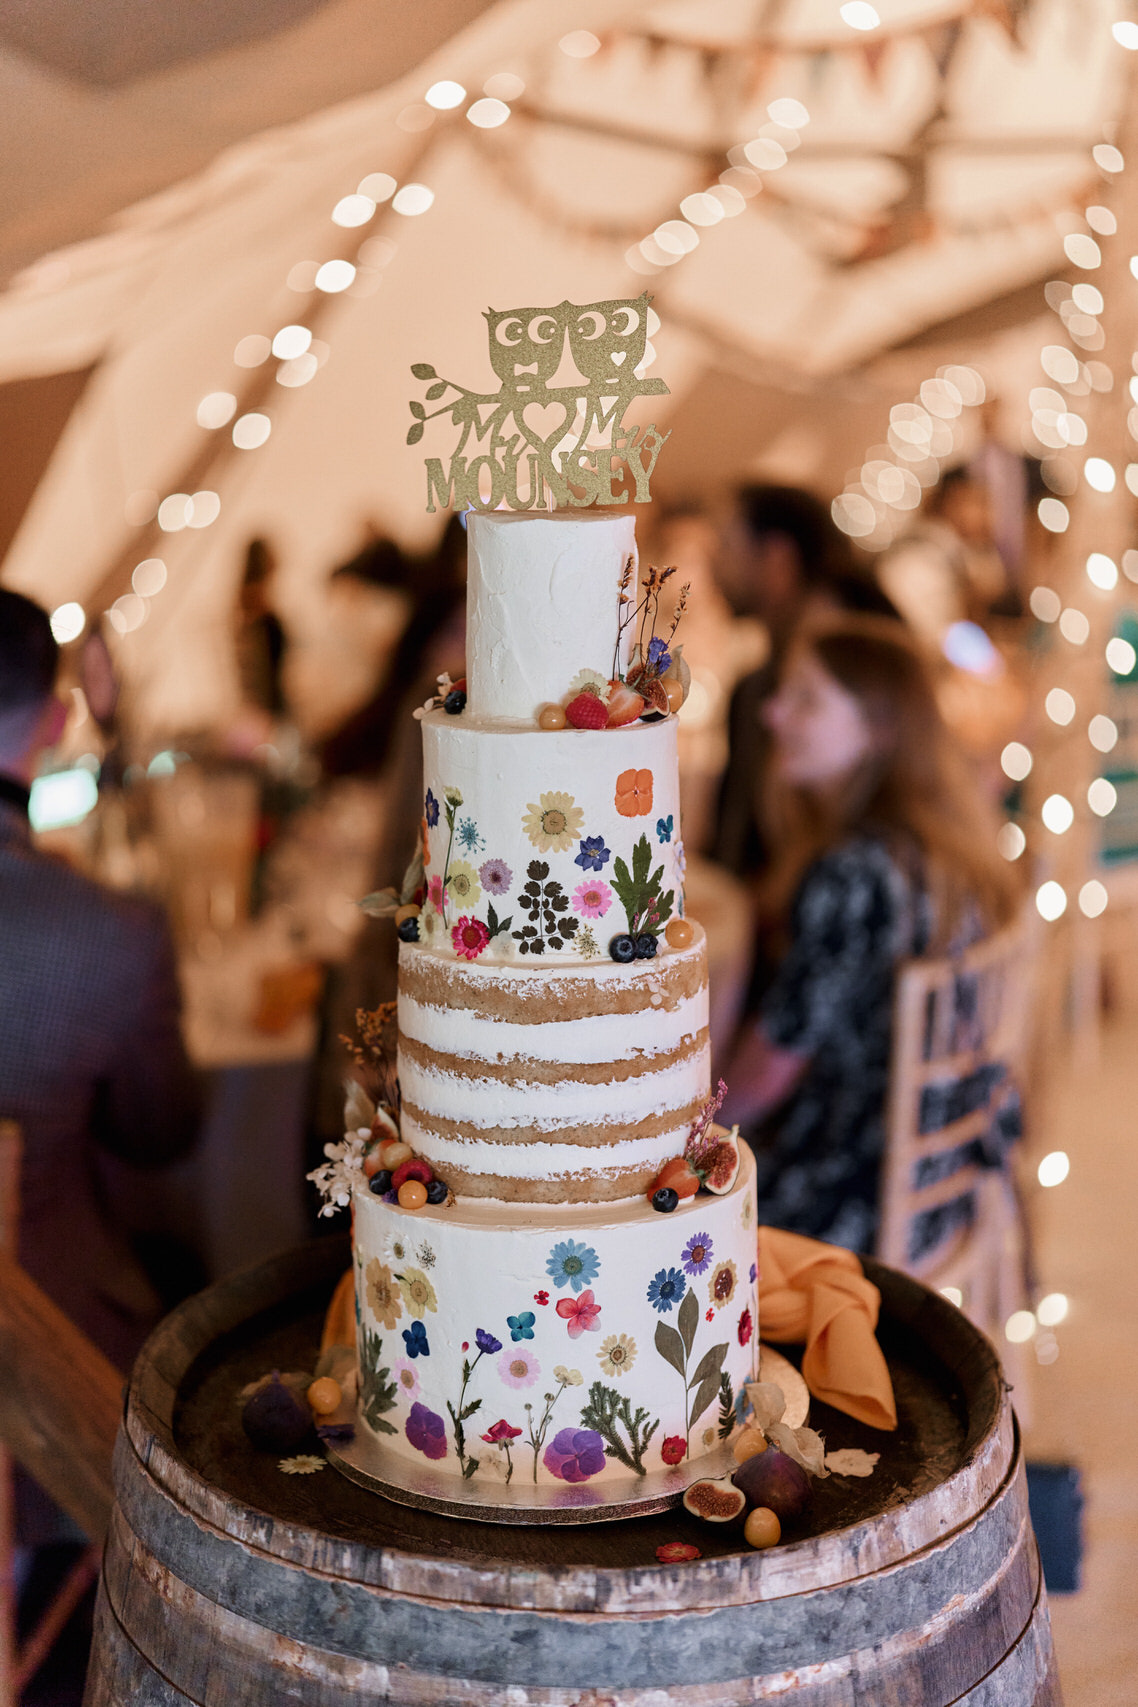 A wedding cake is placed on top of a wooden barrel.